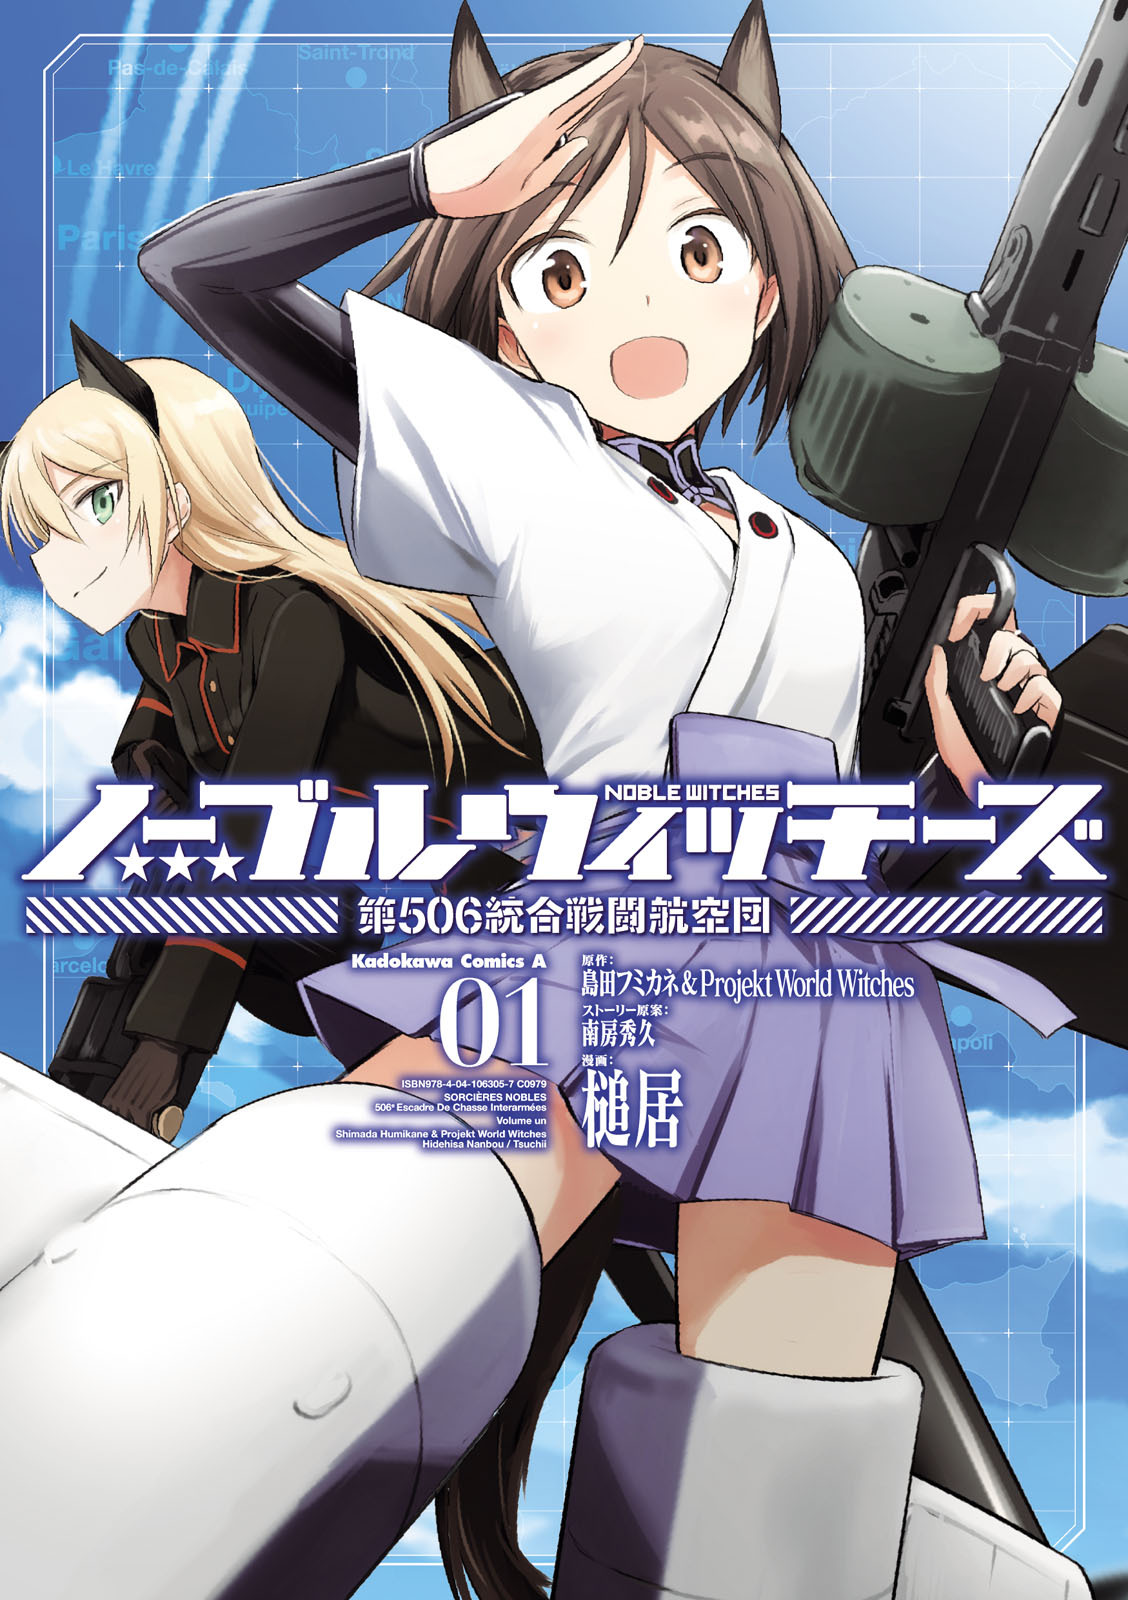 Noble Witches: The 506th Joint Fighter Wing | World Witches Series 